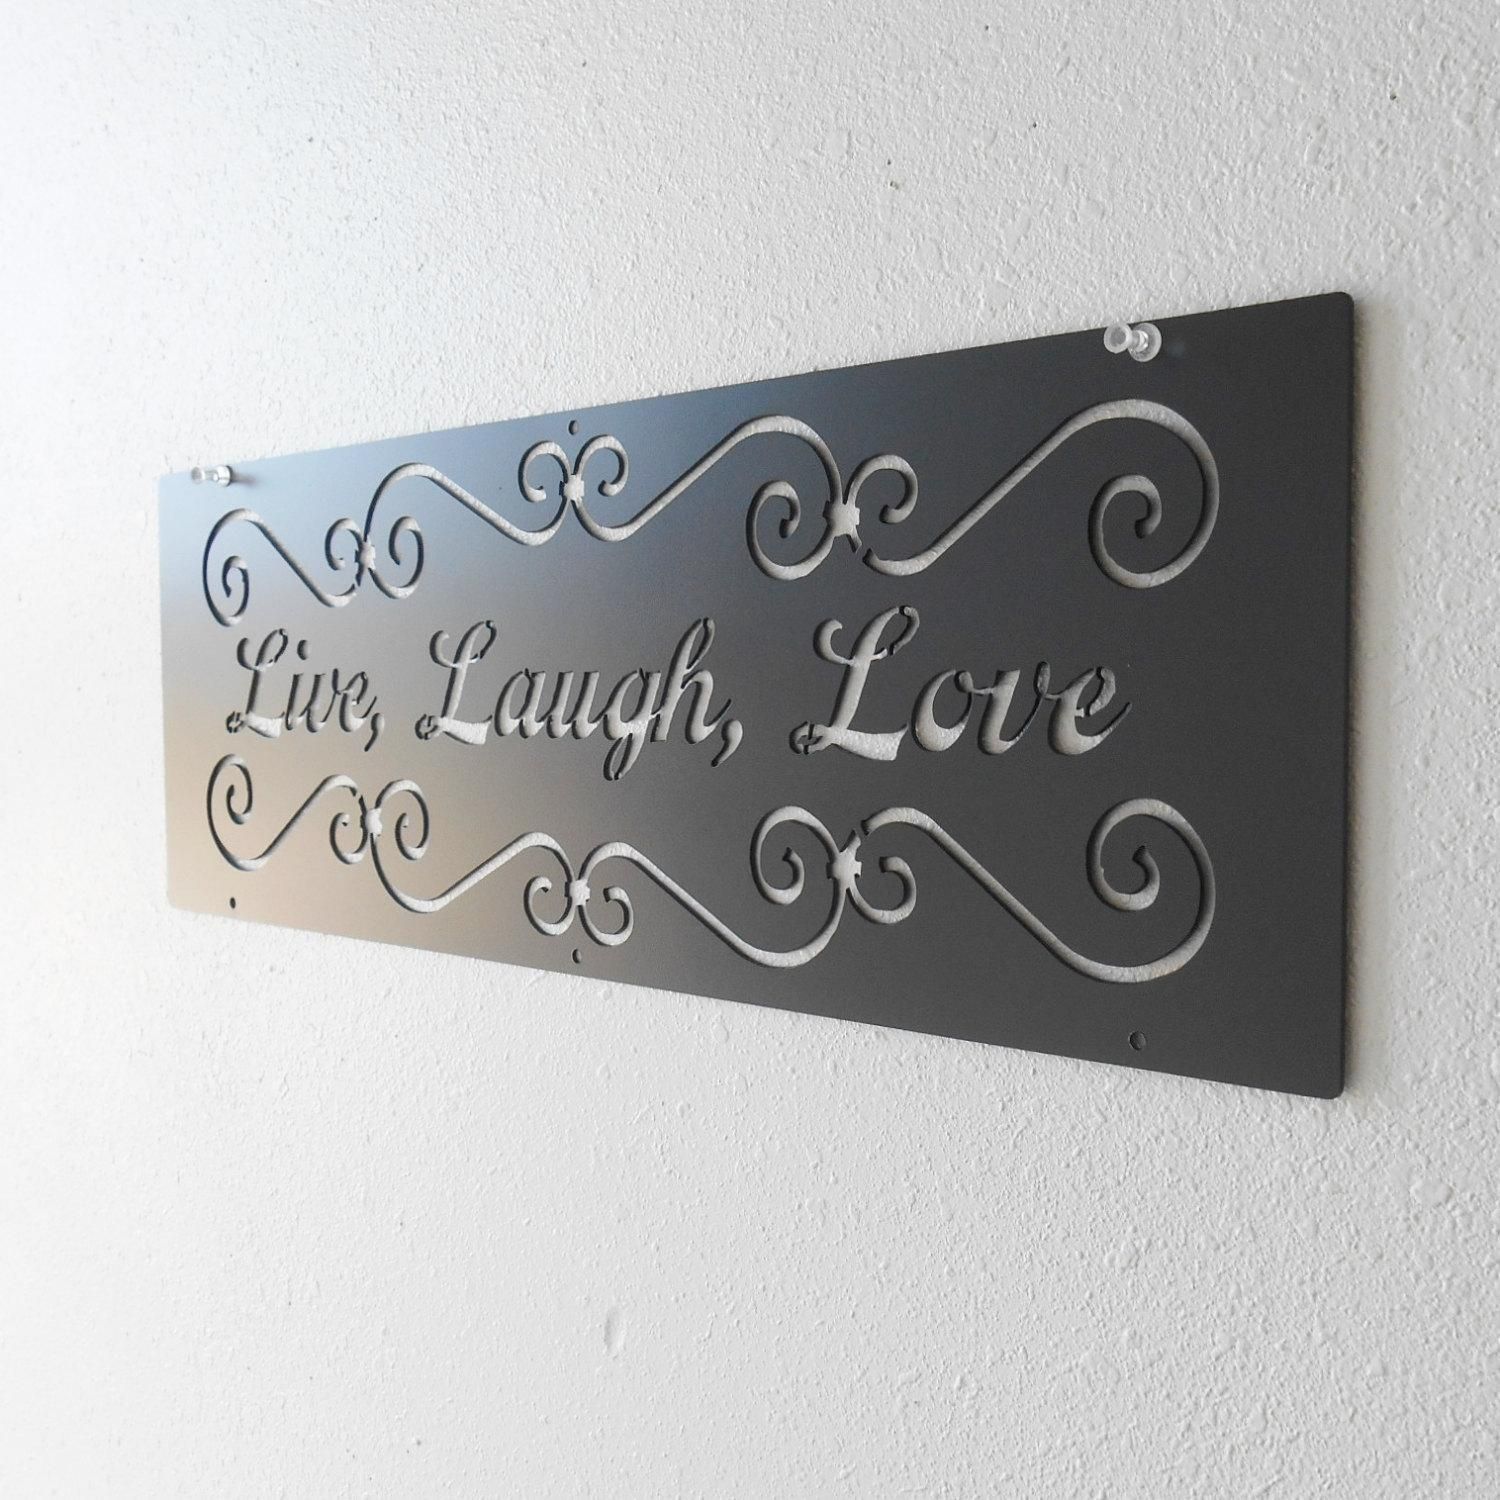 Live Laugh Love / Metal Art / Wall Decoration / Metal Sign / Home Regarding Live Laugh Love Wall Art Metal (View 4 of 20)